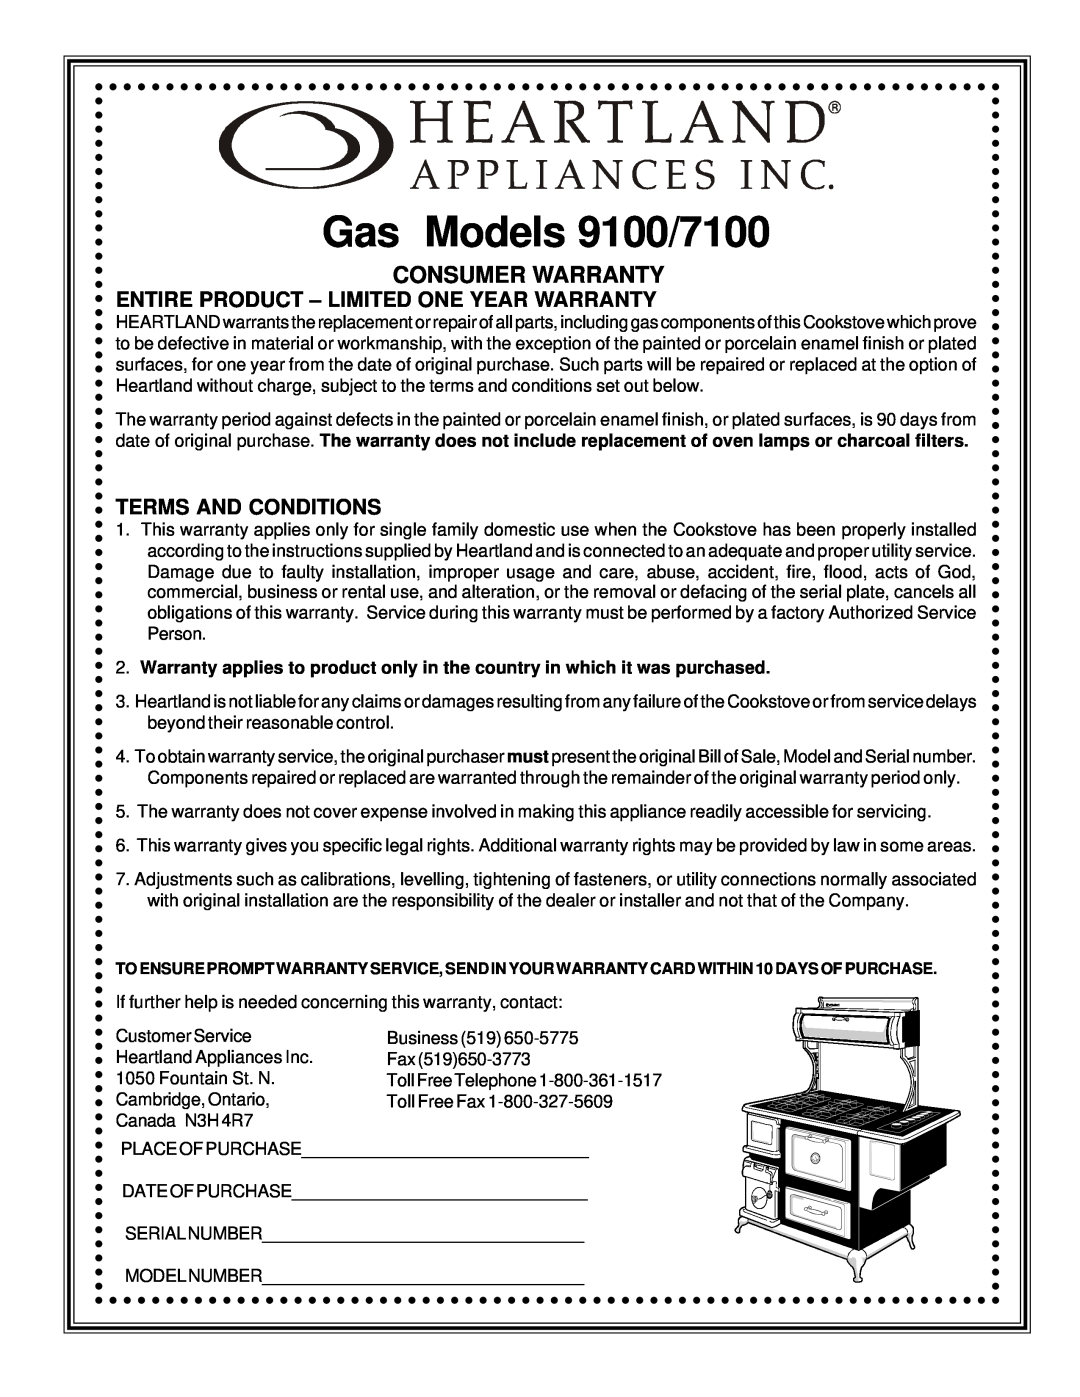 Hearth and Home Technologies manual Gas Models 9100/7100, Consumer Warranty, Entire Product - Limited One Year Warranty 